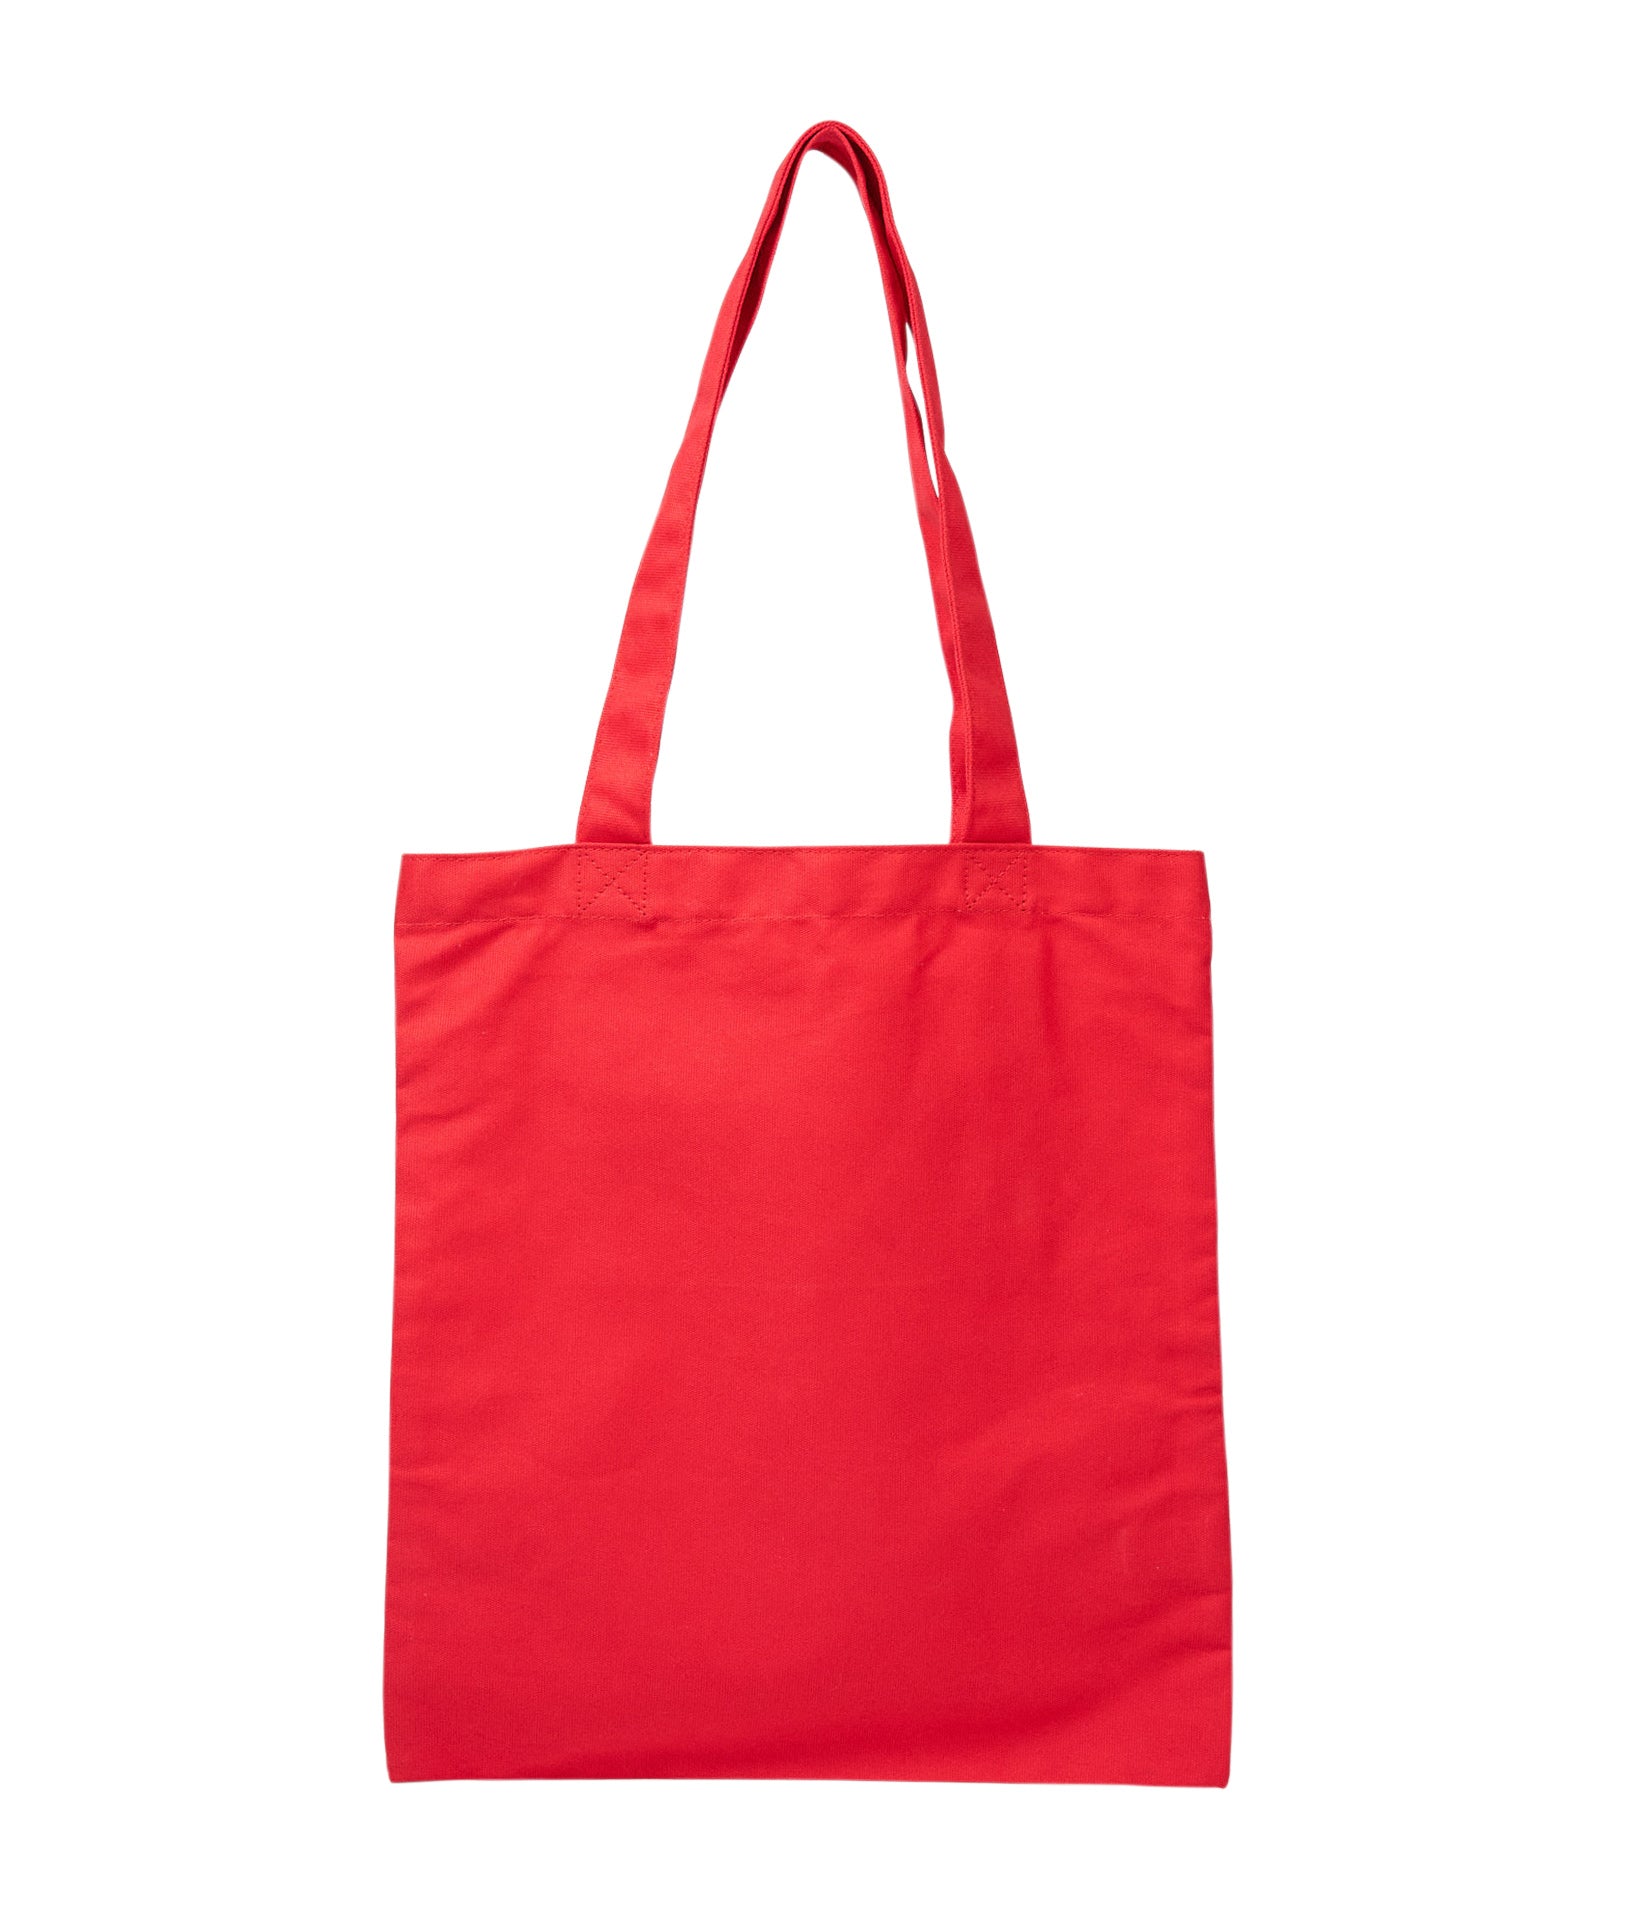 The Recycled Daily Tote